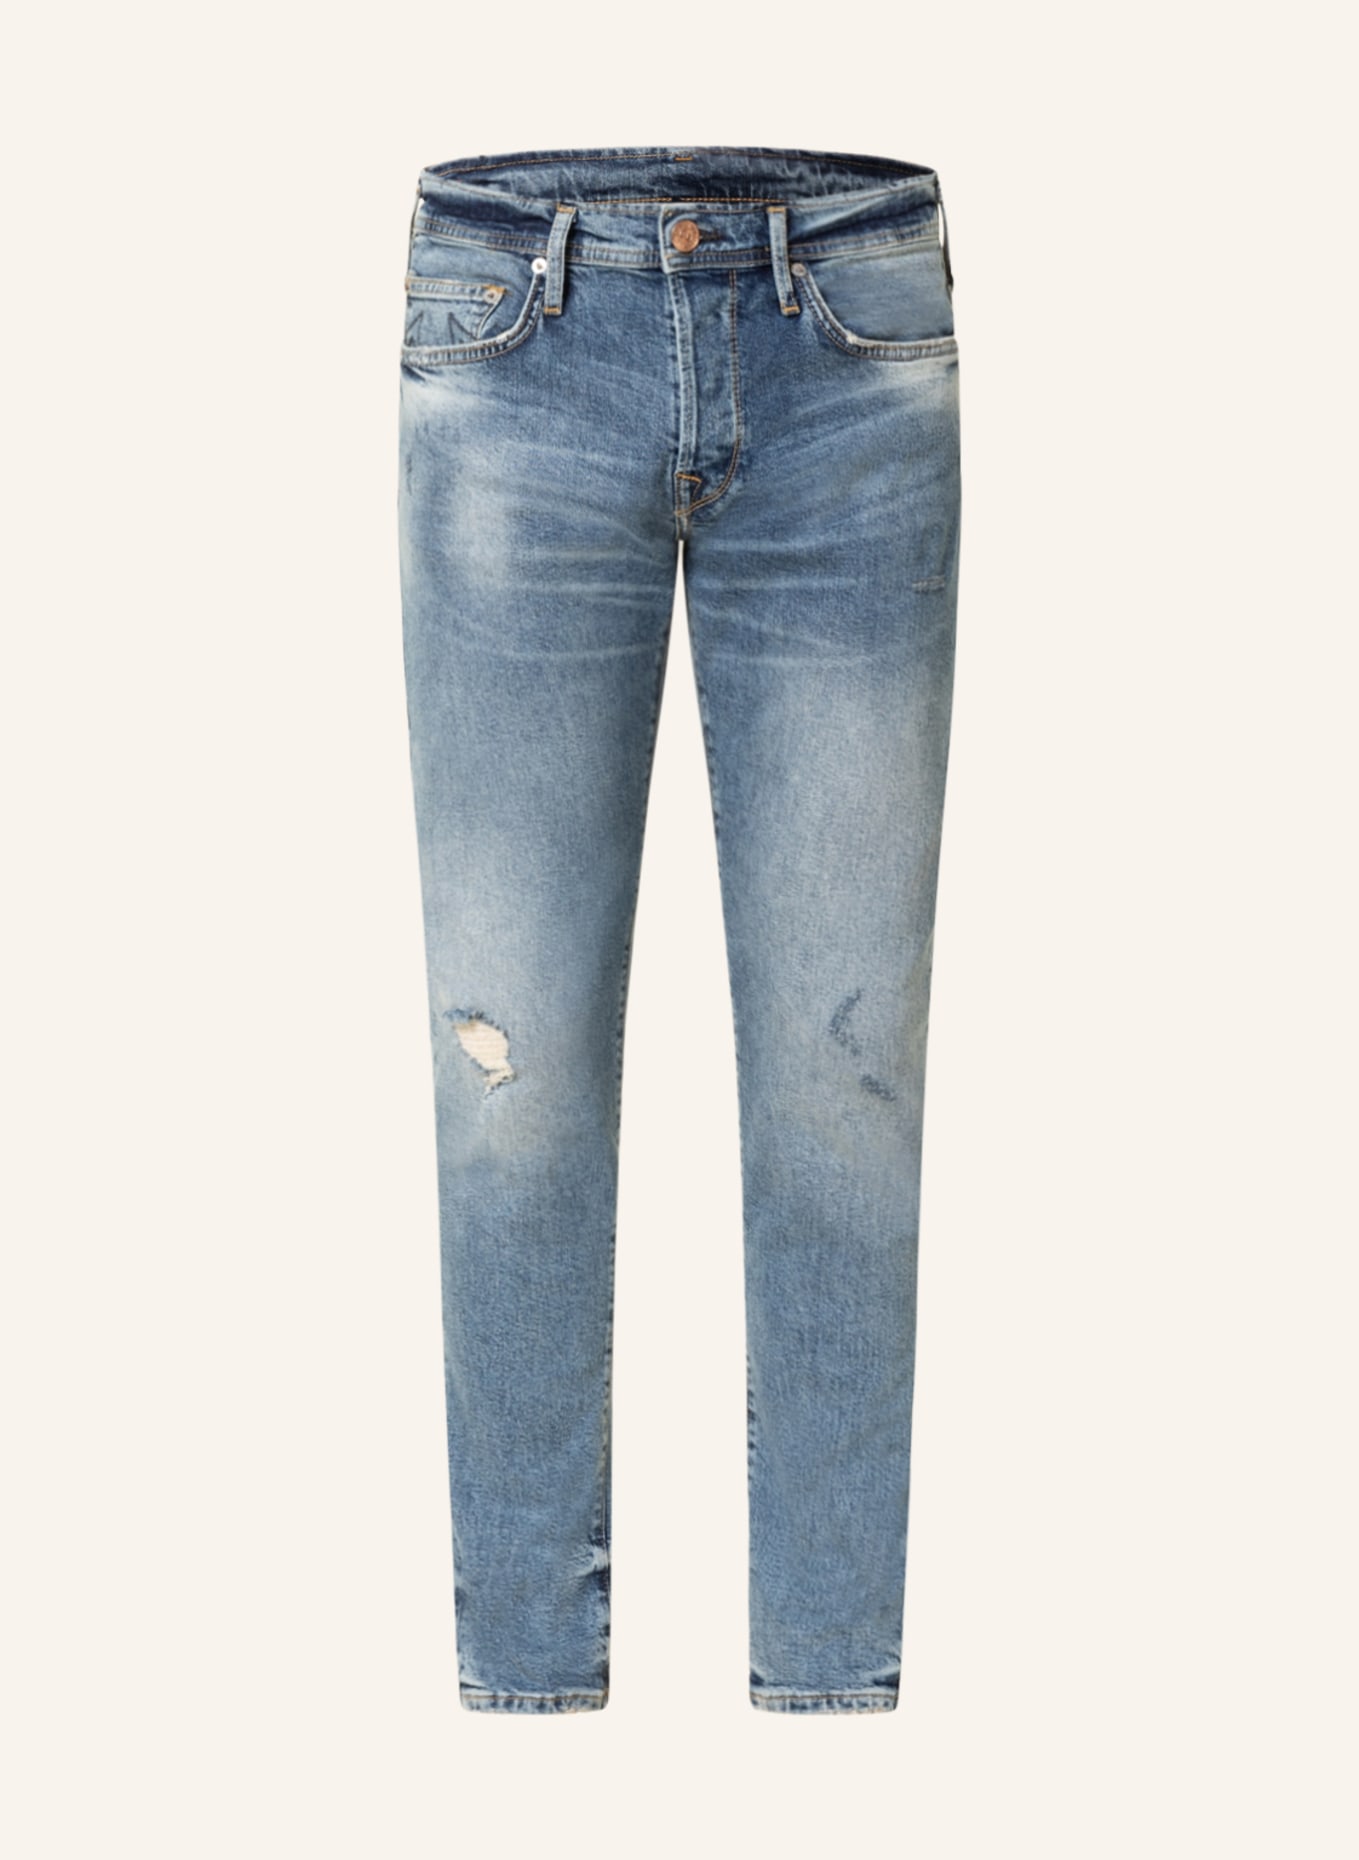 TRUE RELIGION Jeans MARCO Relaxed Tapered Fit, Farbe: 4001 (Bild 1)